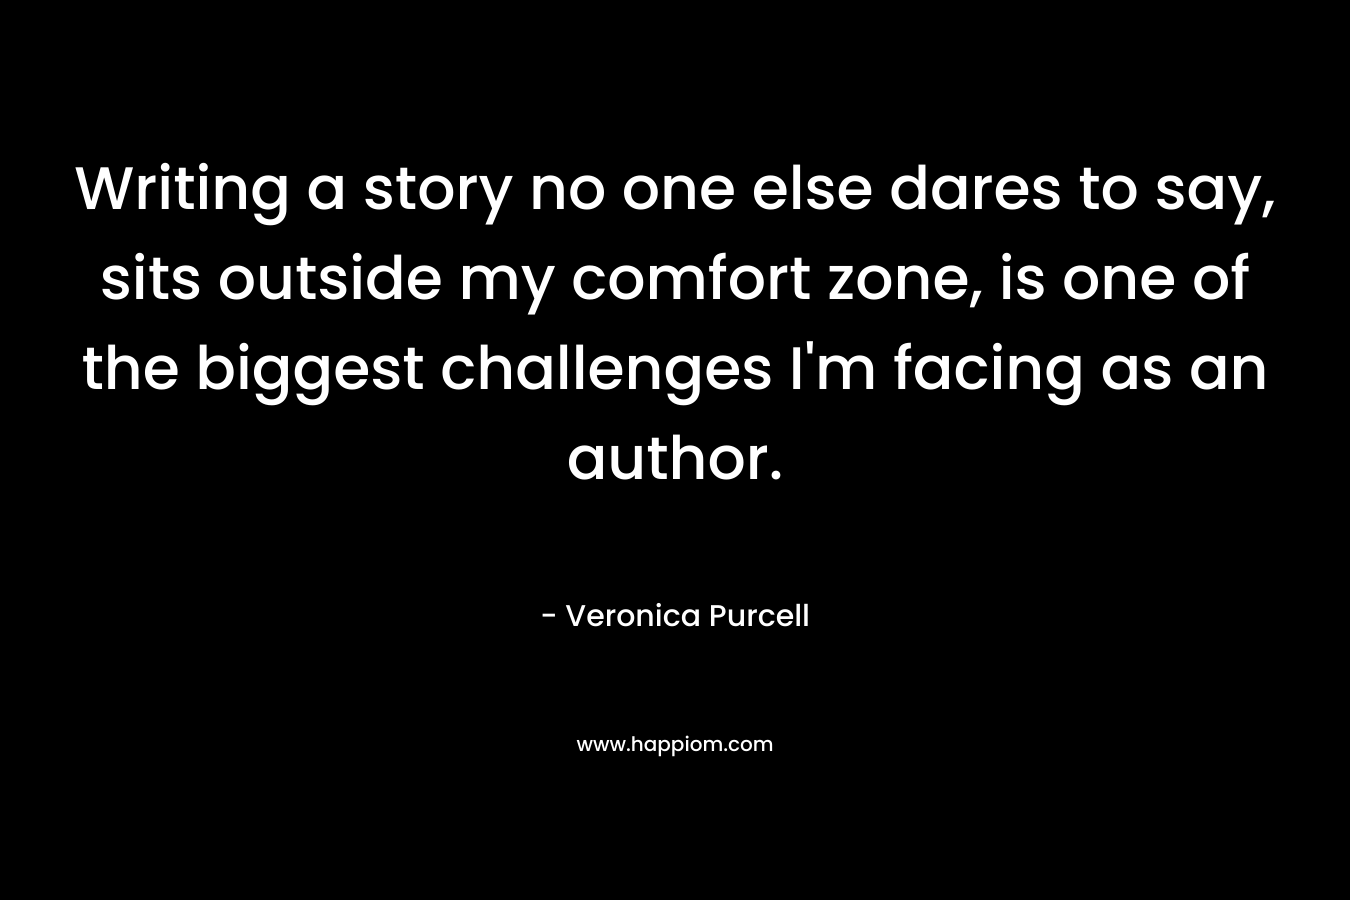 Writing a story no one else dares to say, sits outside my comfort zone, is one of the biggest challenges I'm facing as an author.